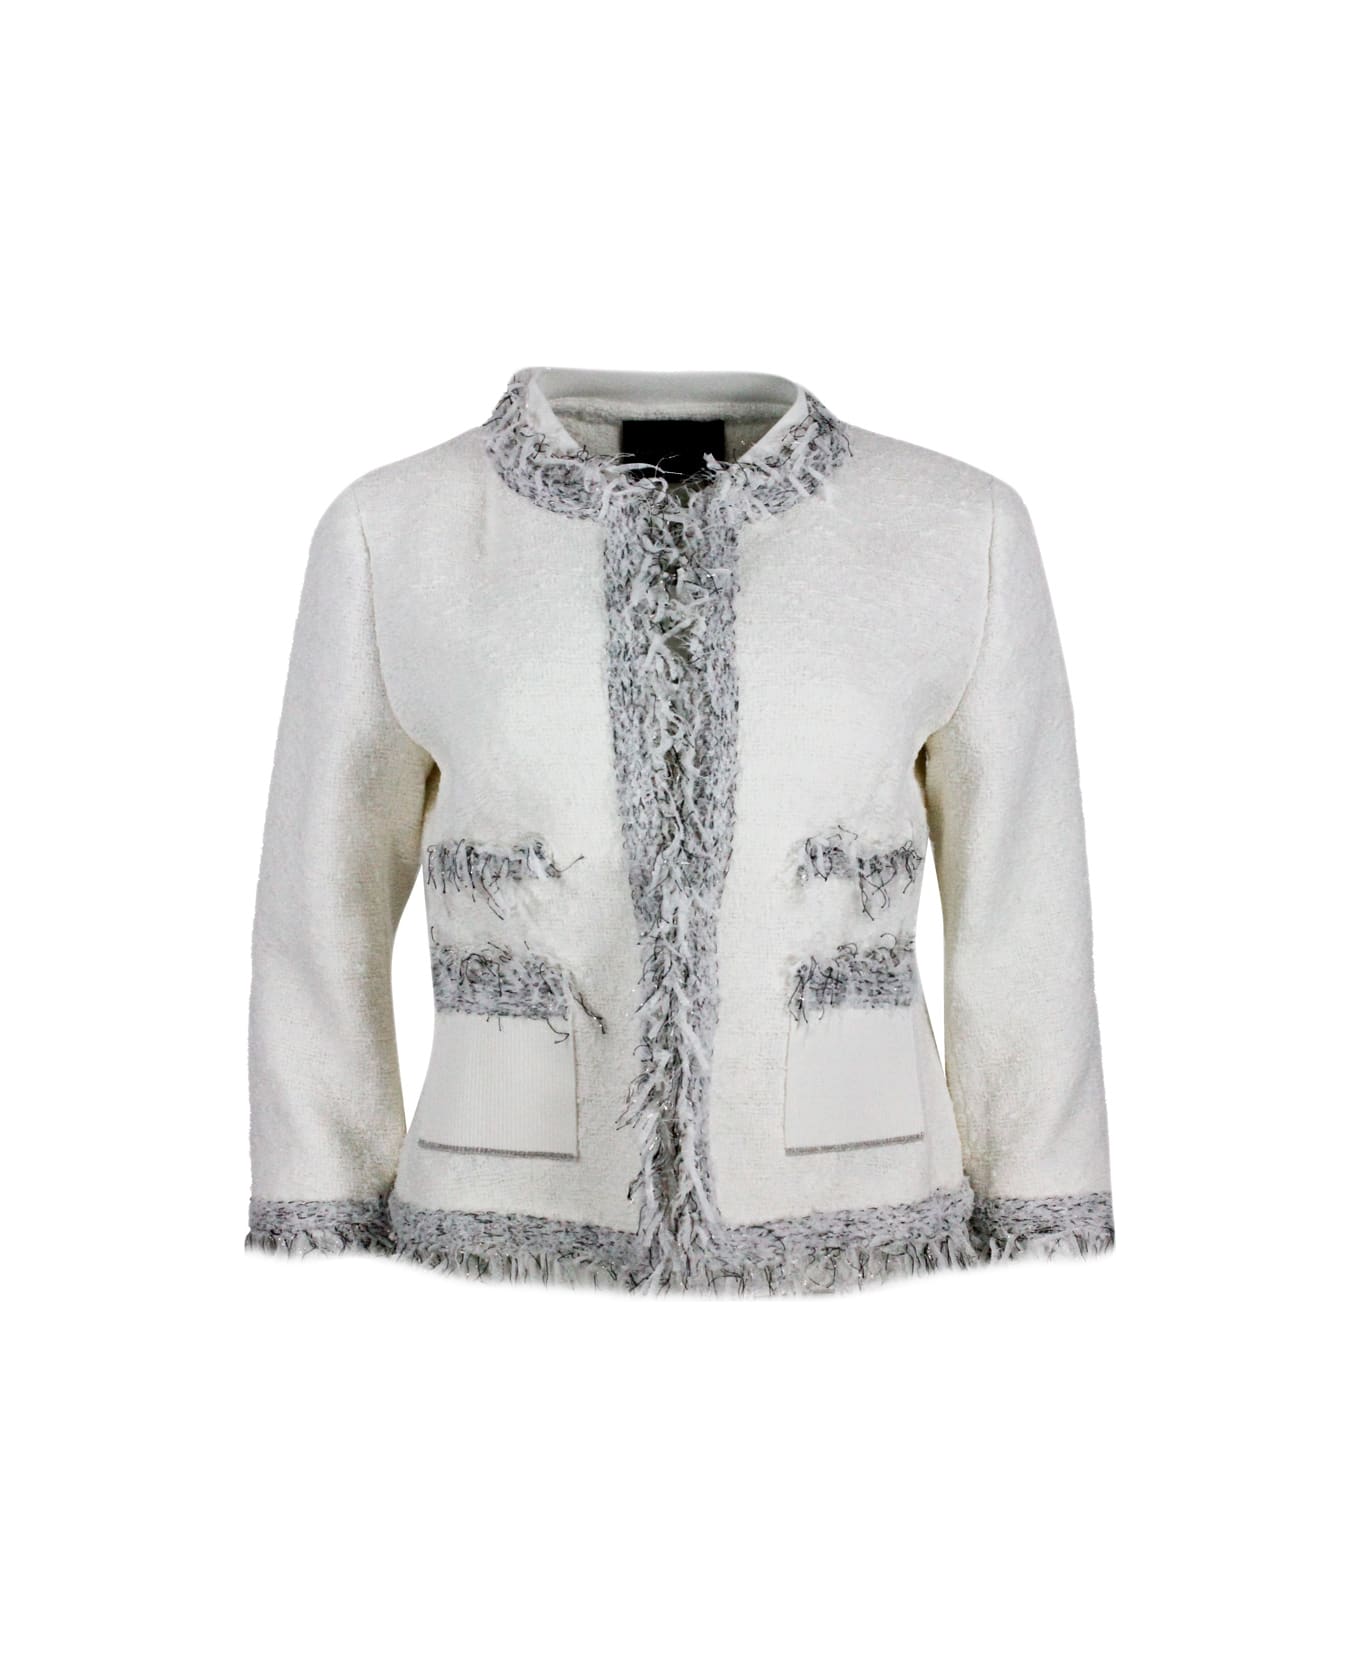 Lorena Antoniazzi Chanel-style Jacket With Long Sleeves And Mandarin Collar In Worked Cotton With Ribbon Applications On The Edges - cream ジャケット